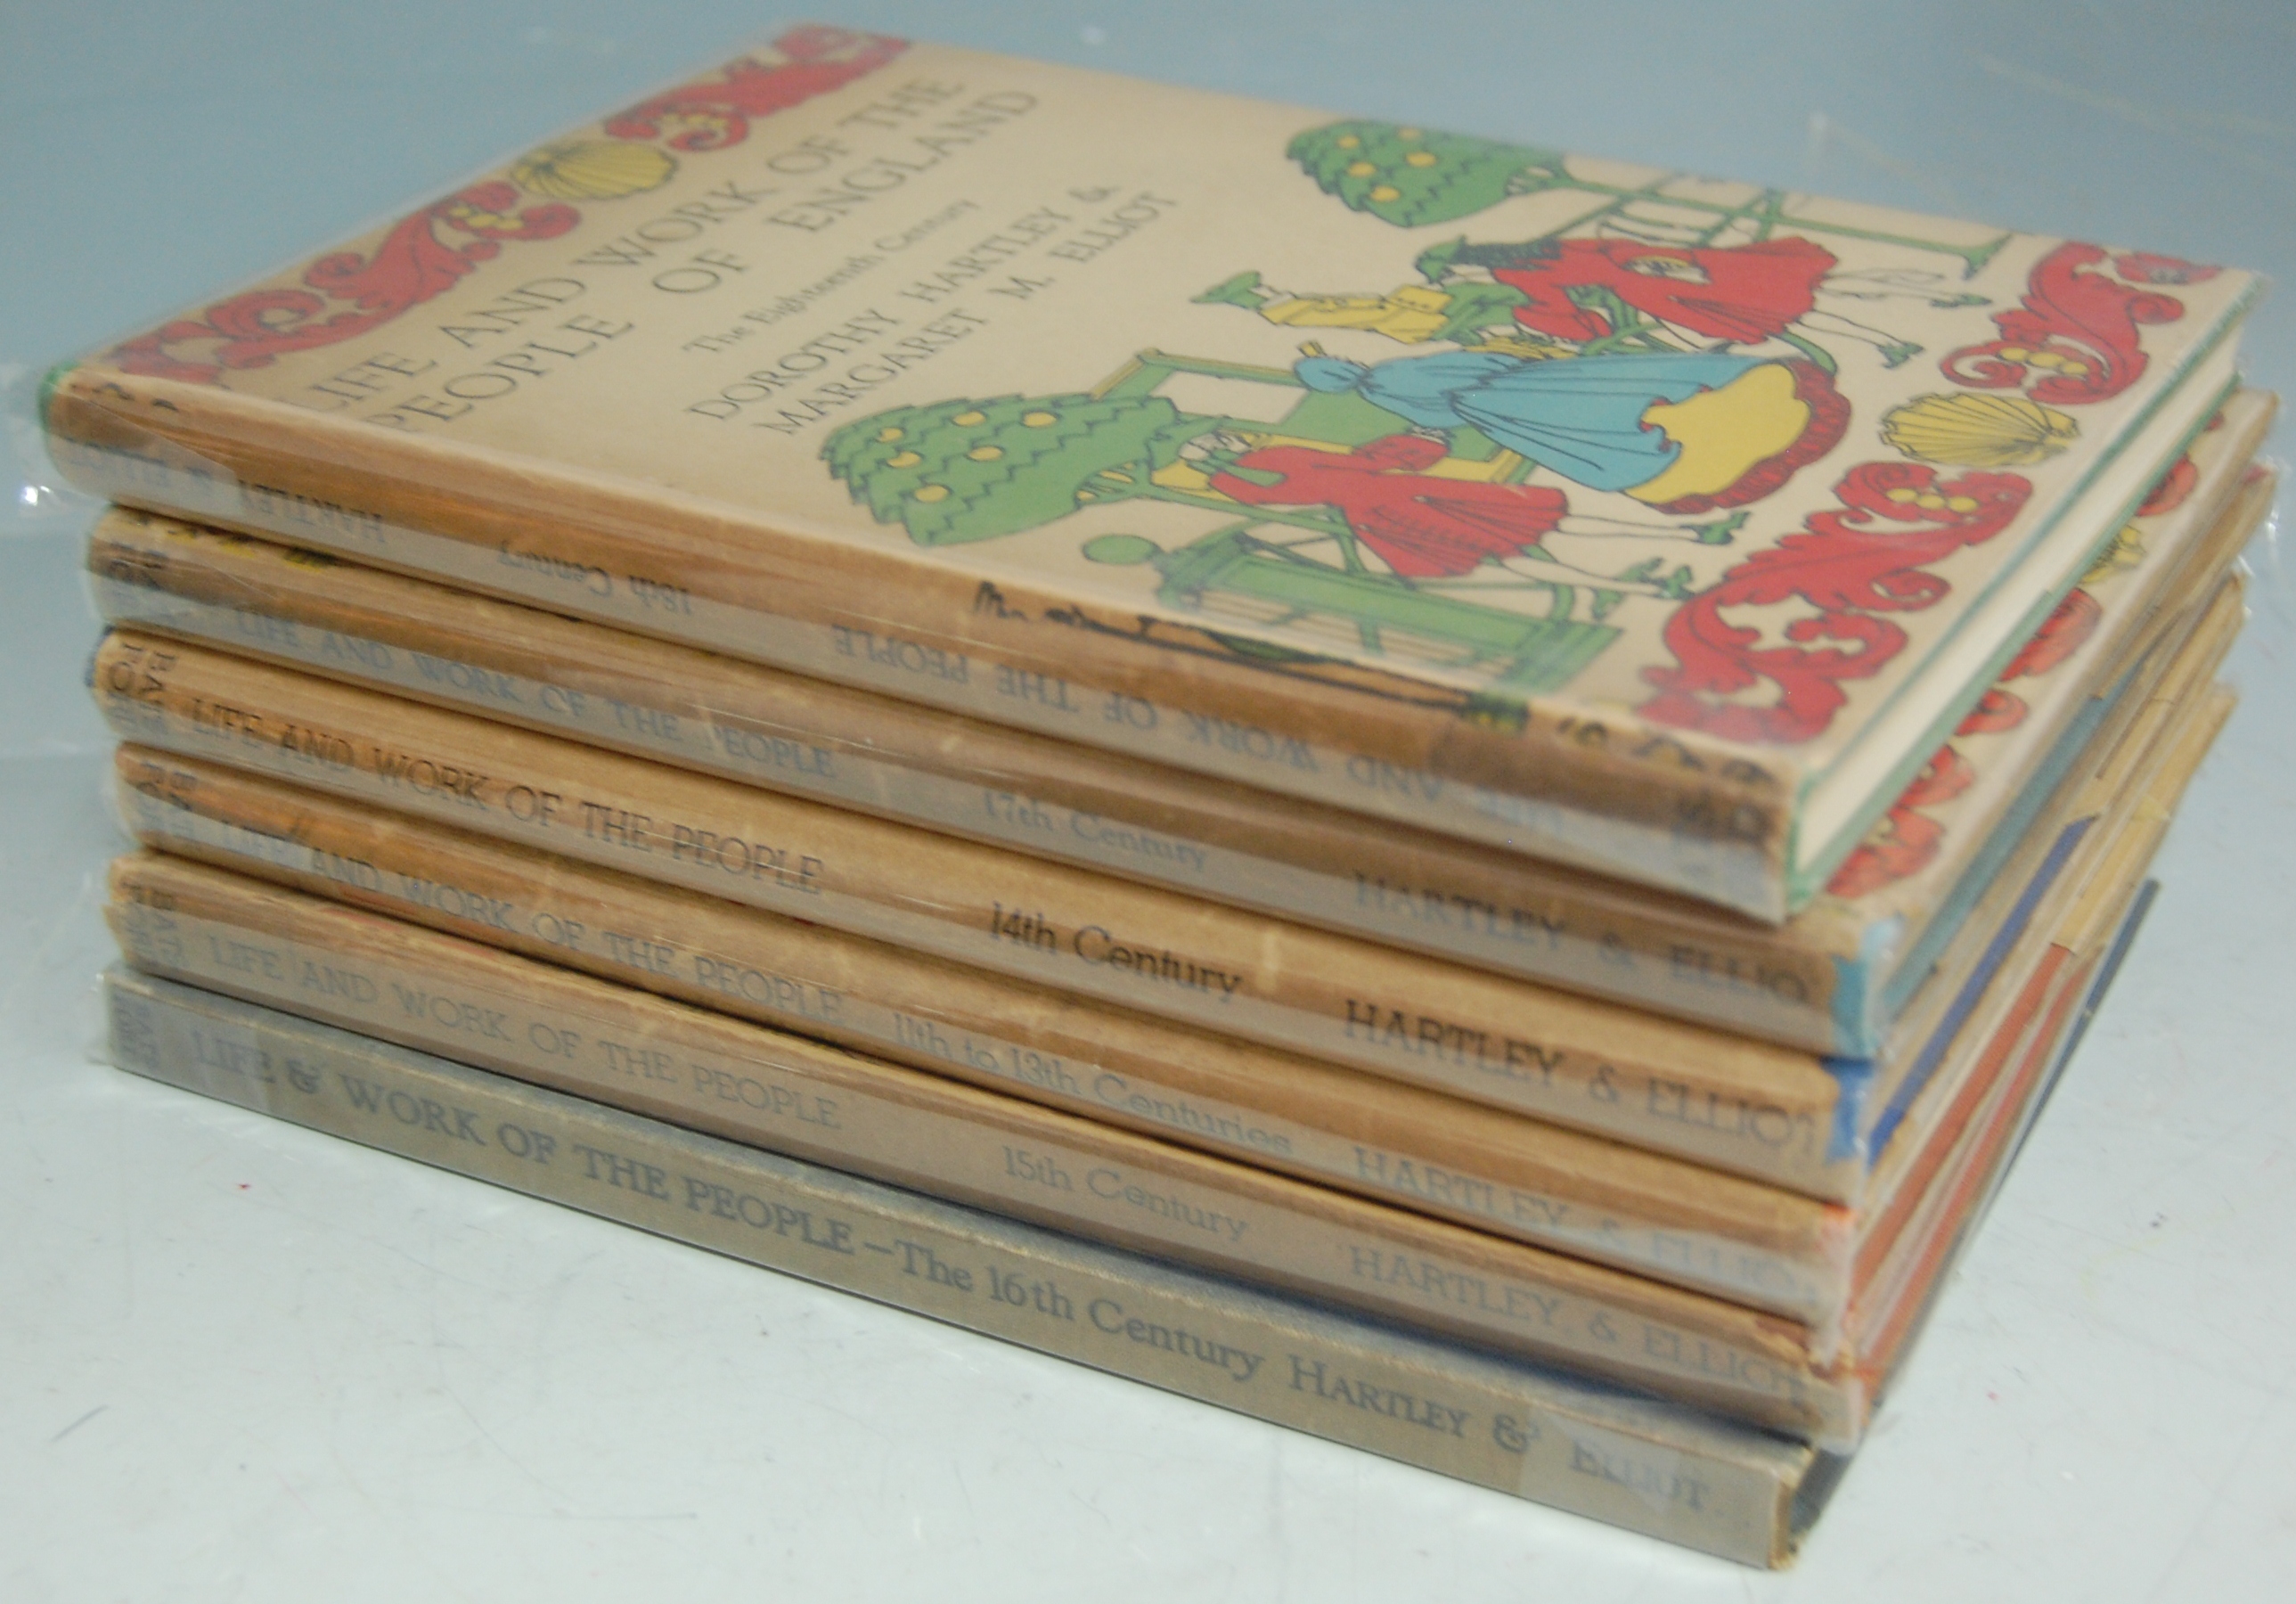 SIX **NOTE CHANGE** volumes of The Life and Work of the People of England by Dorothy Hartley and